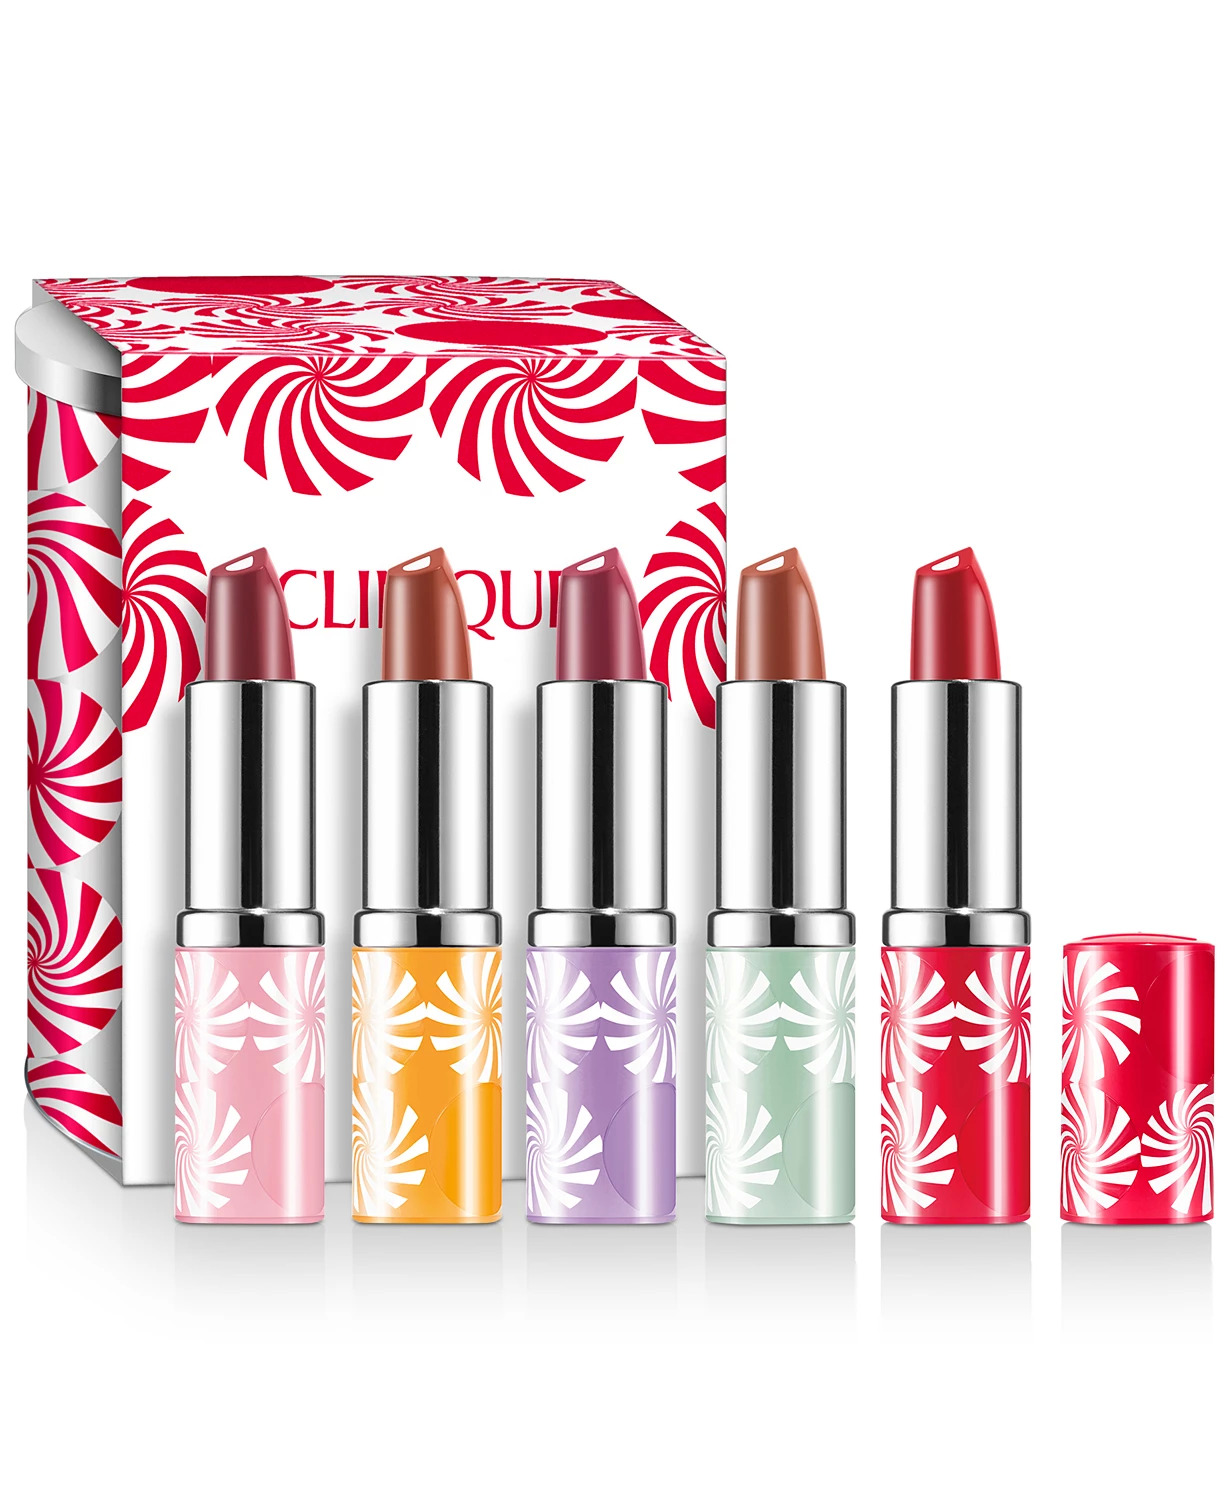 Clinique Sale: 2-Pc Beauty Bauble Eye Set $5, 3-Pc A Little Happiness Fragrance Set $10, 5-Pc Sugarcoated Color Makeup Set $17.15, More + SD Cashback + Free Store Pickup at Macys